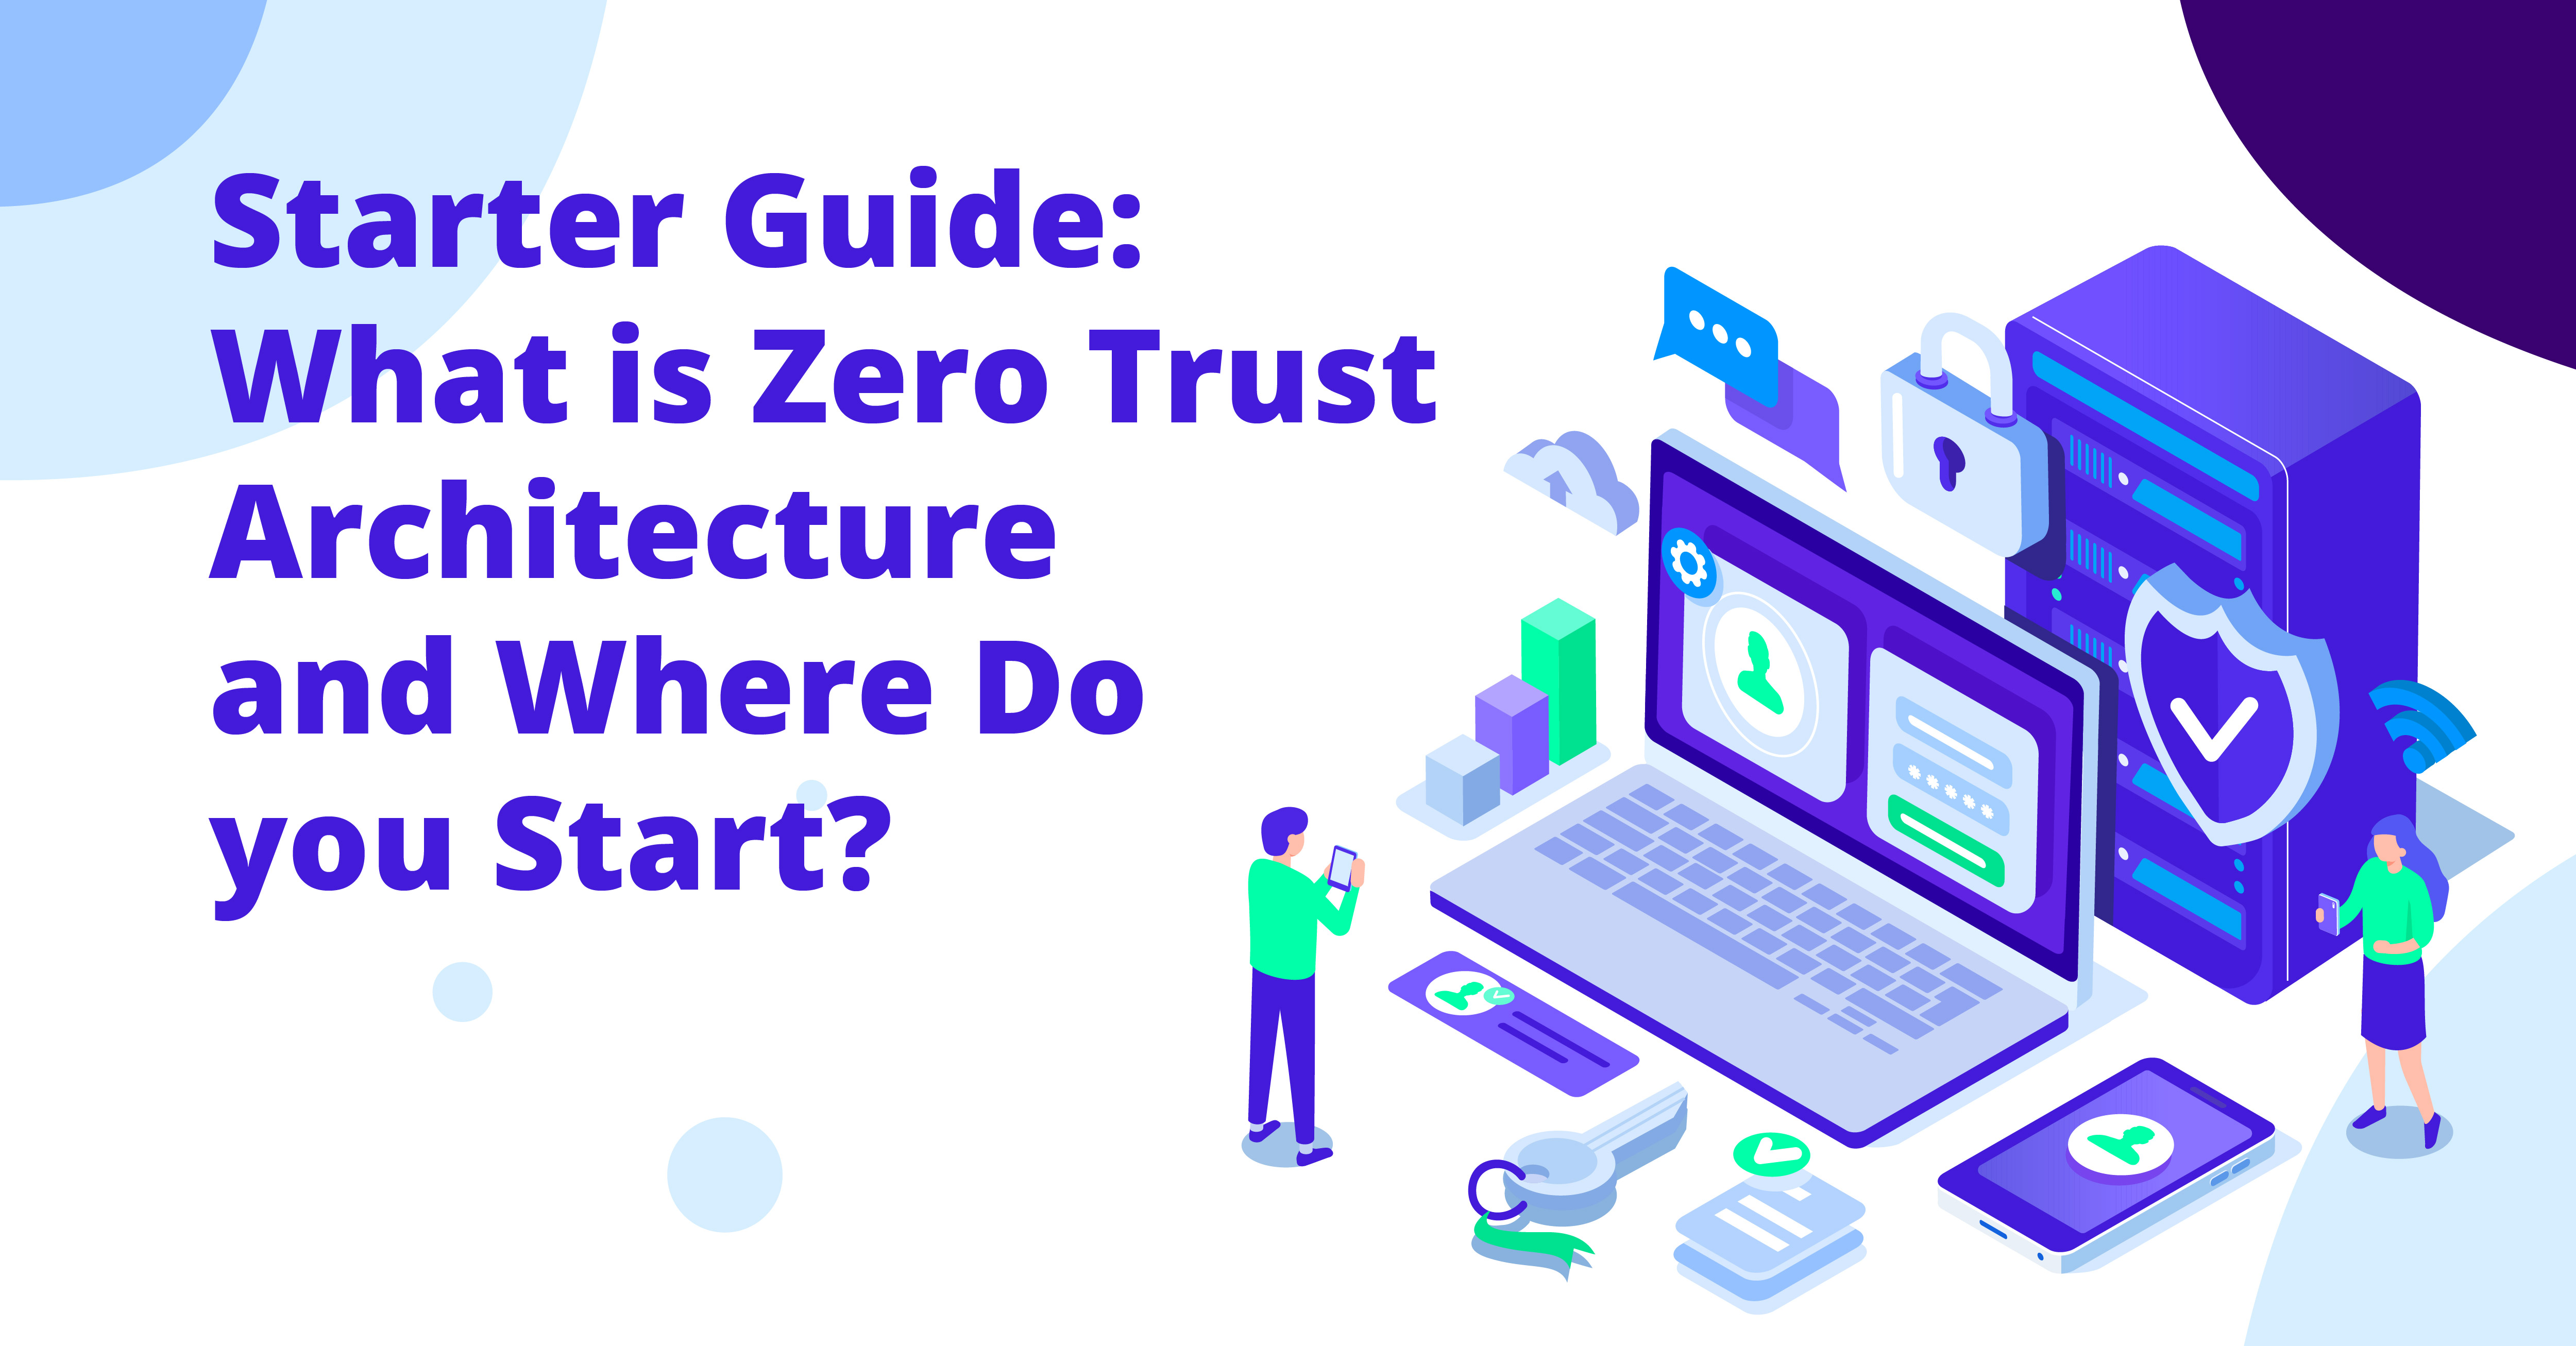 Starter Guide: What is Zero Trust Architecture and Where Do You Start?